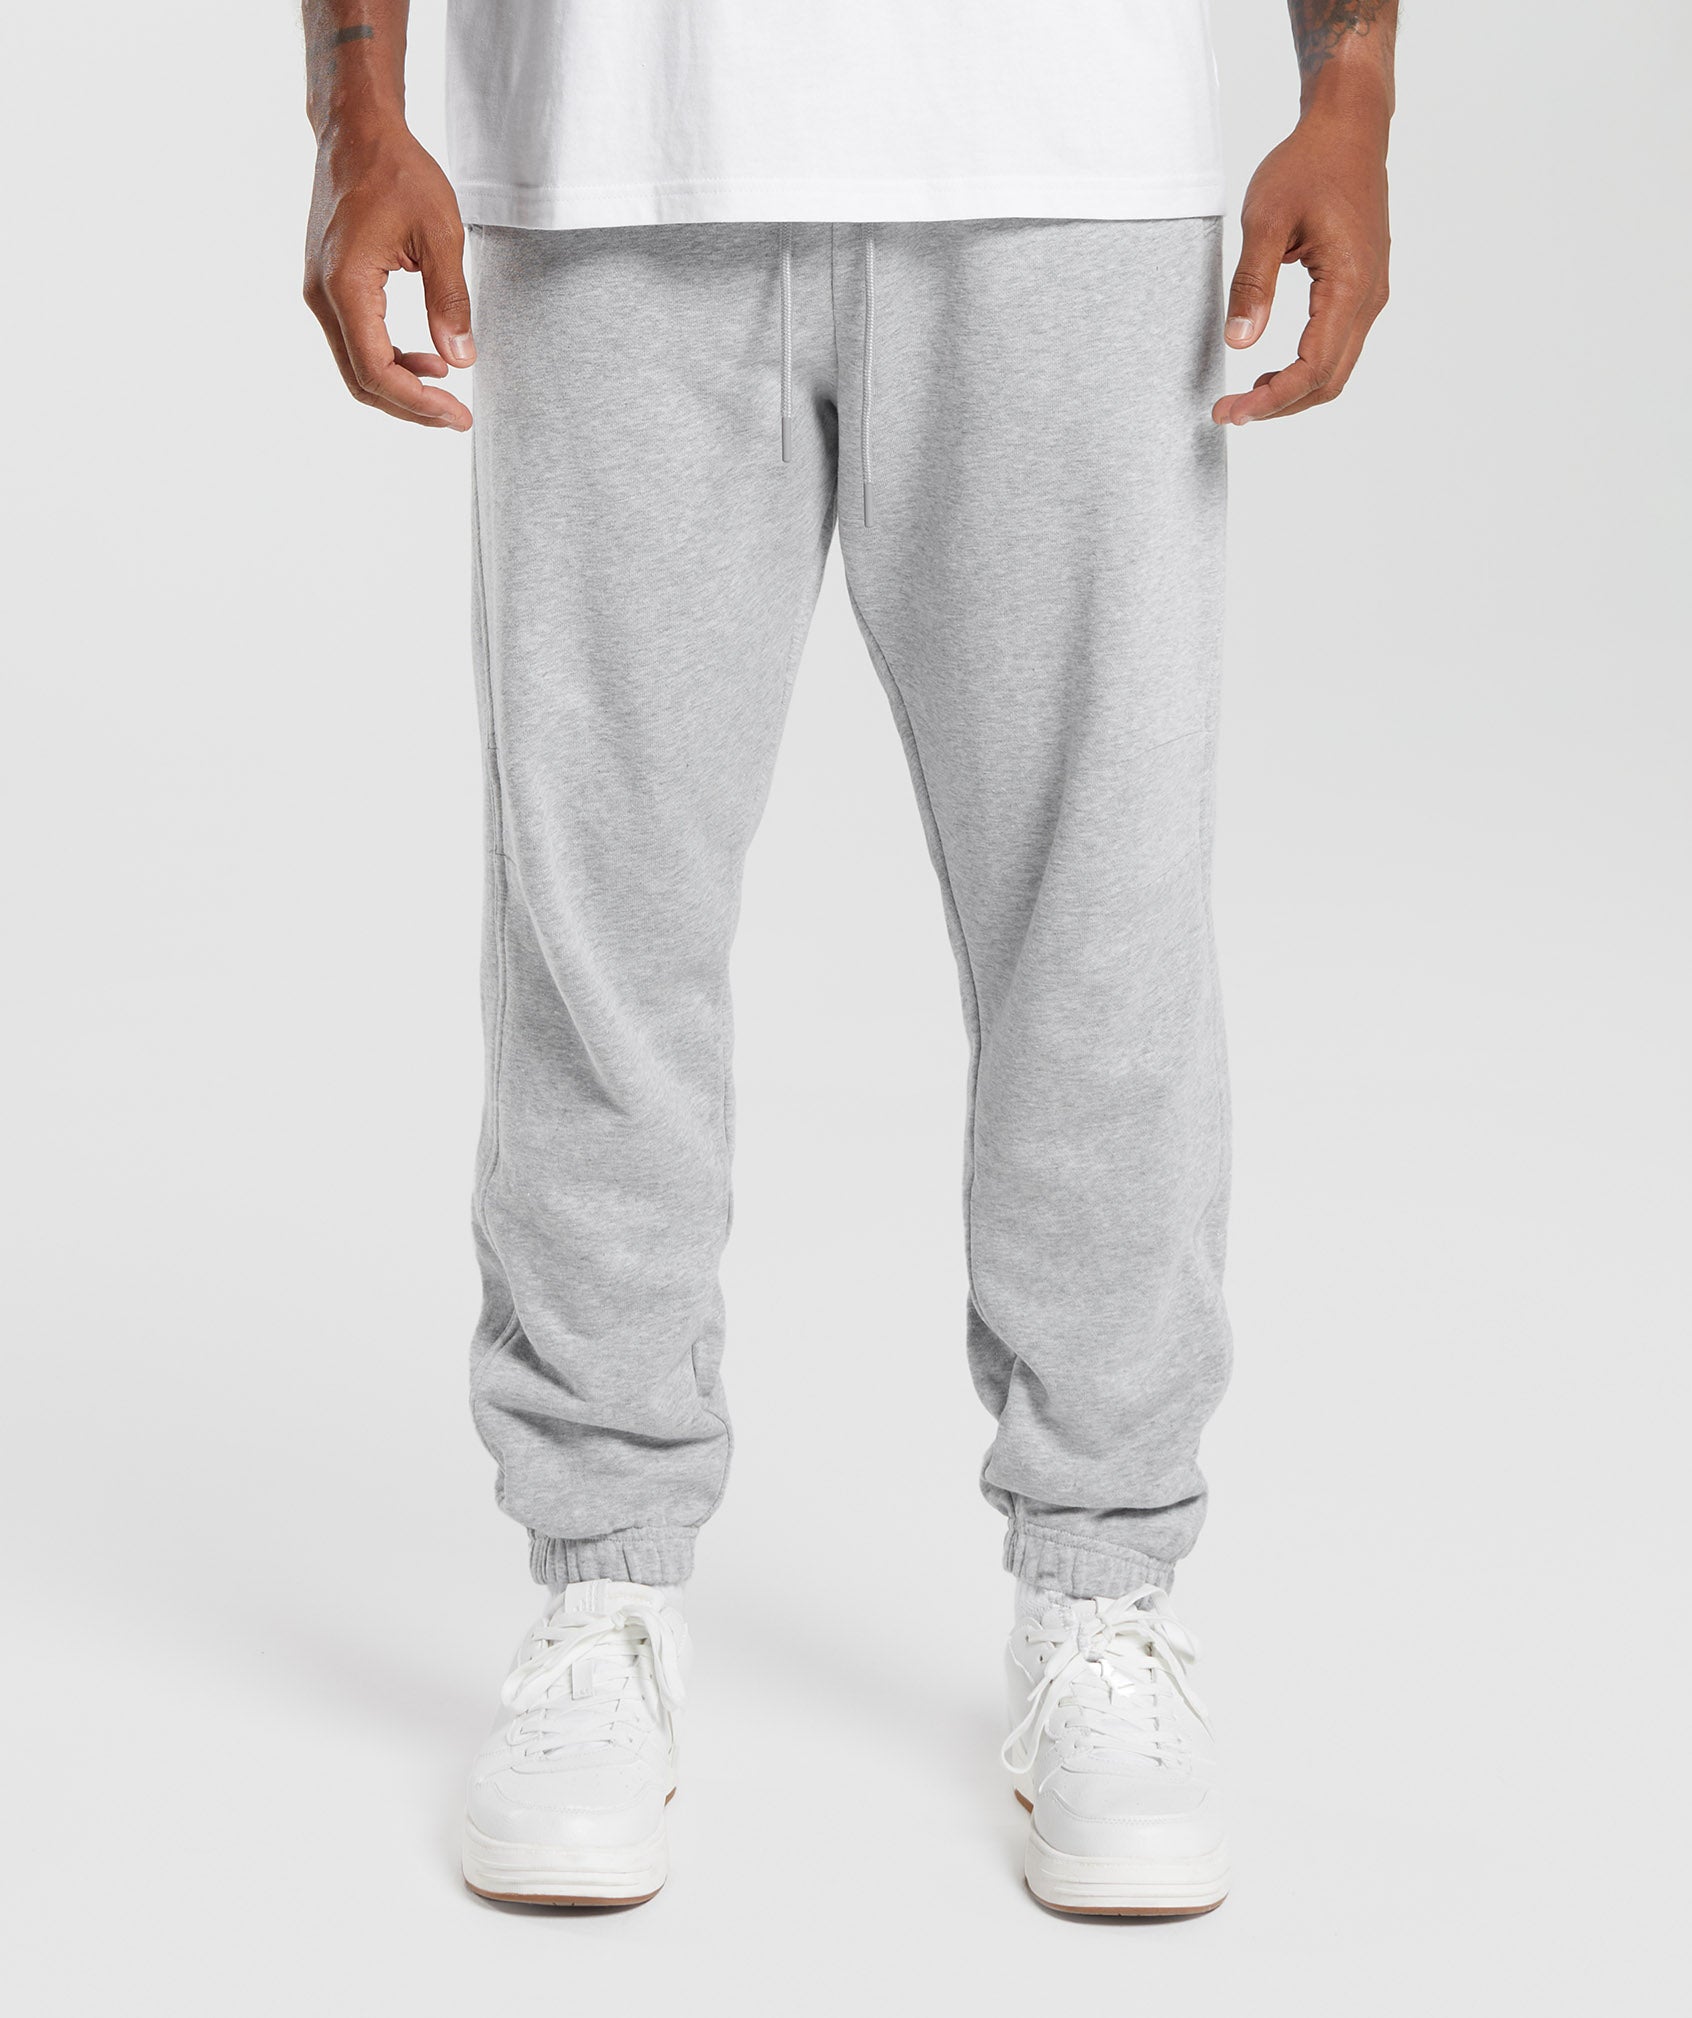 Sulfit Clothing - Grey Jogger Shorts are now live on the website